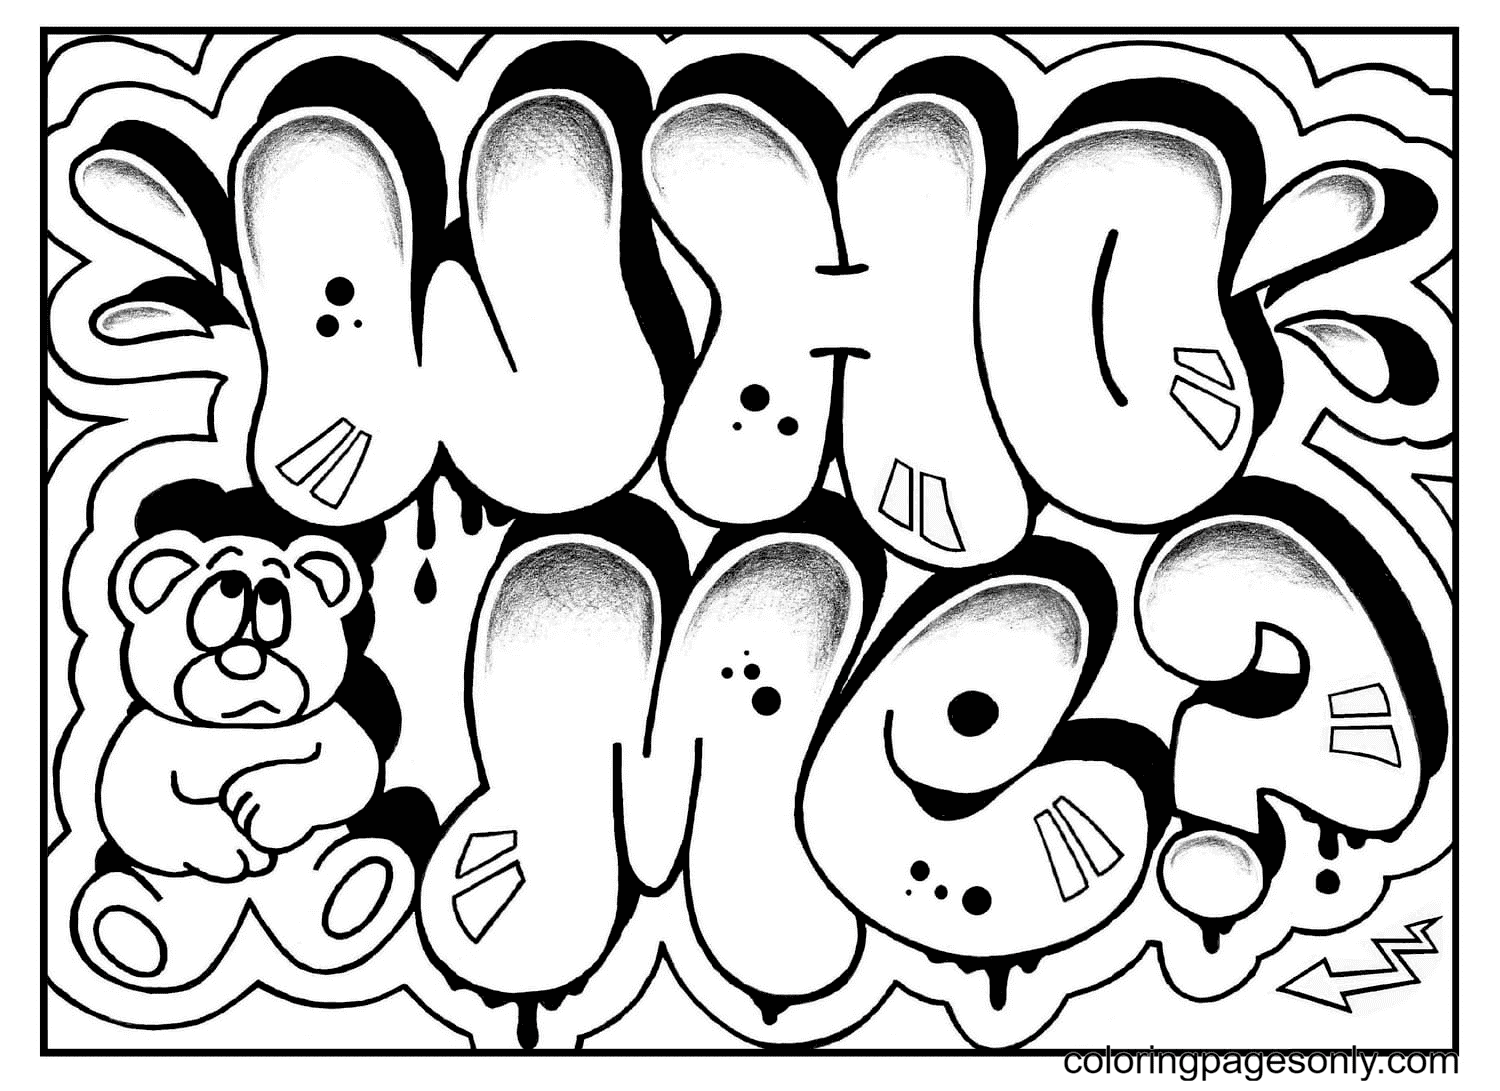 Detail Queen Graffiti Coloring Pages Nomer 12